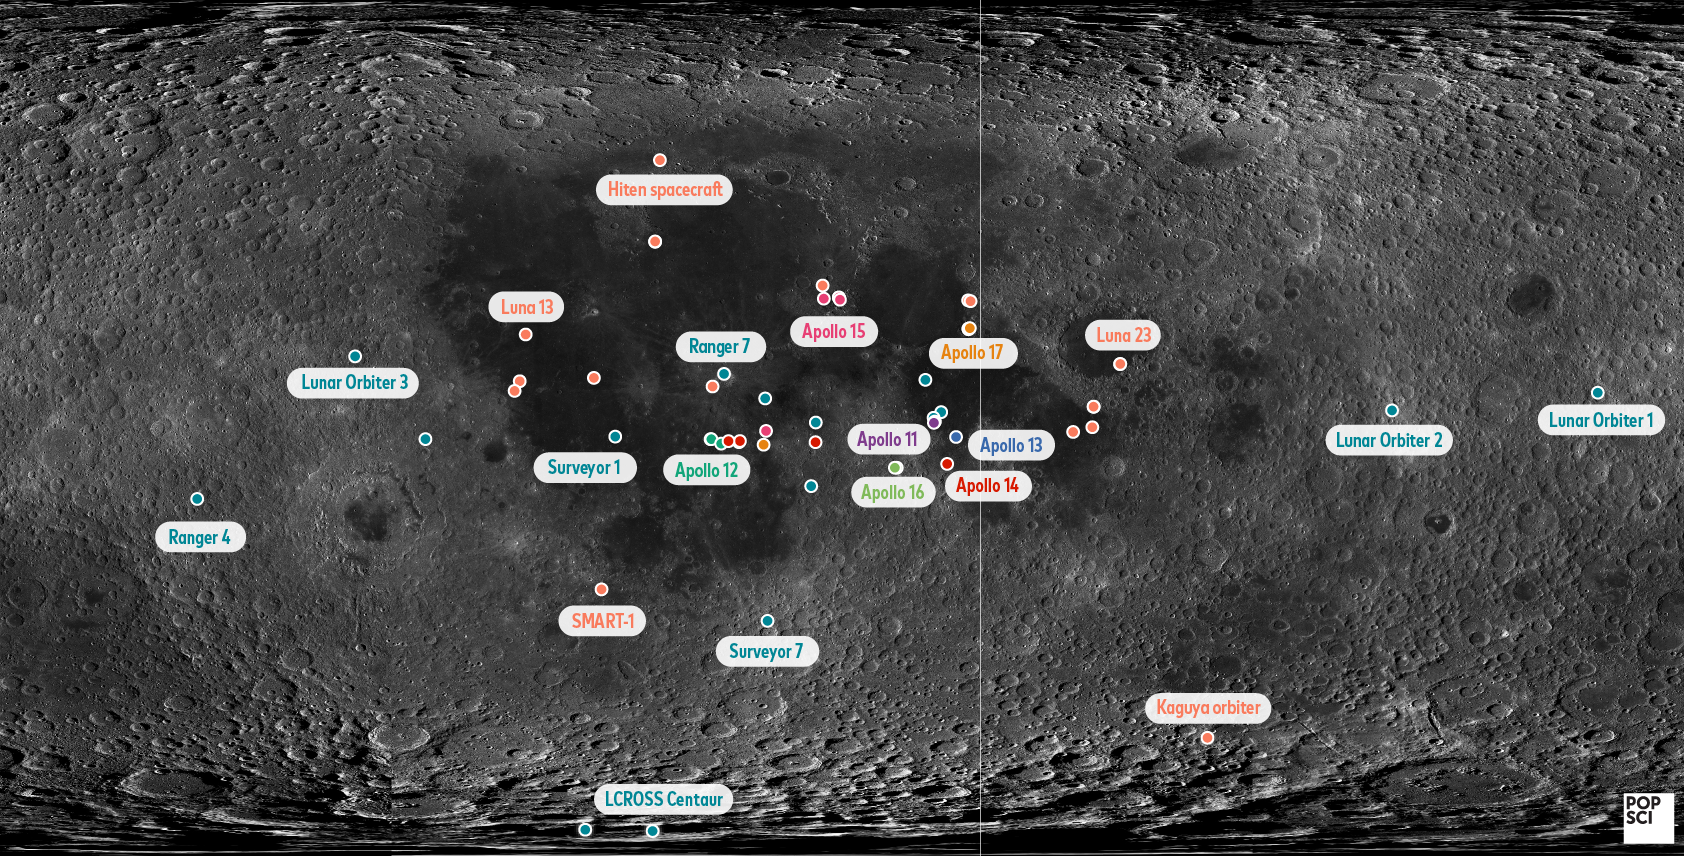 Money, shoes, poop, and other highlights from the 796 items we’ve left on the moon